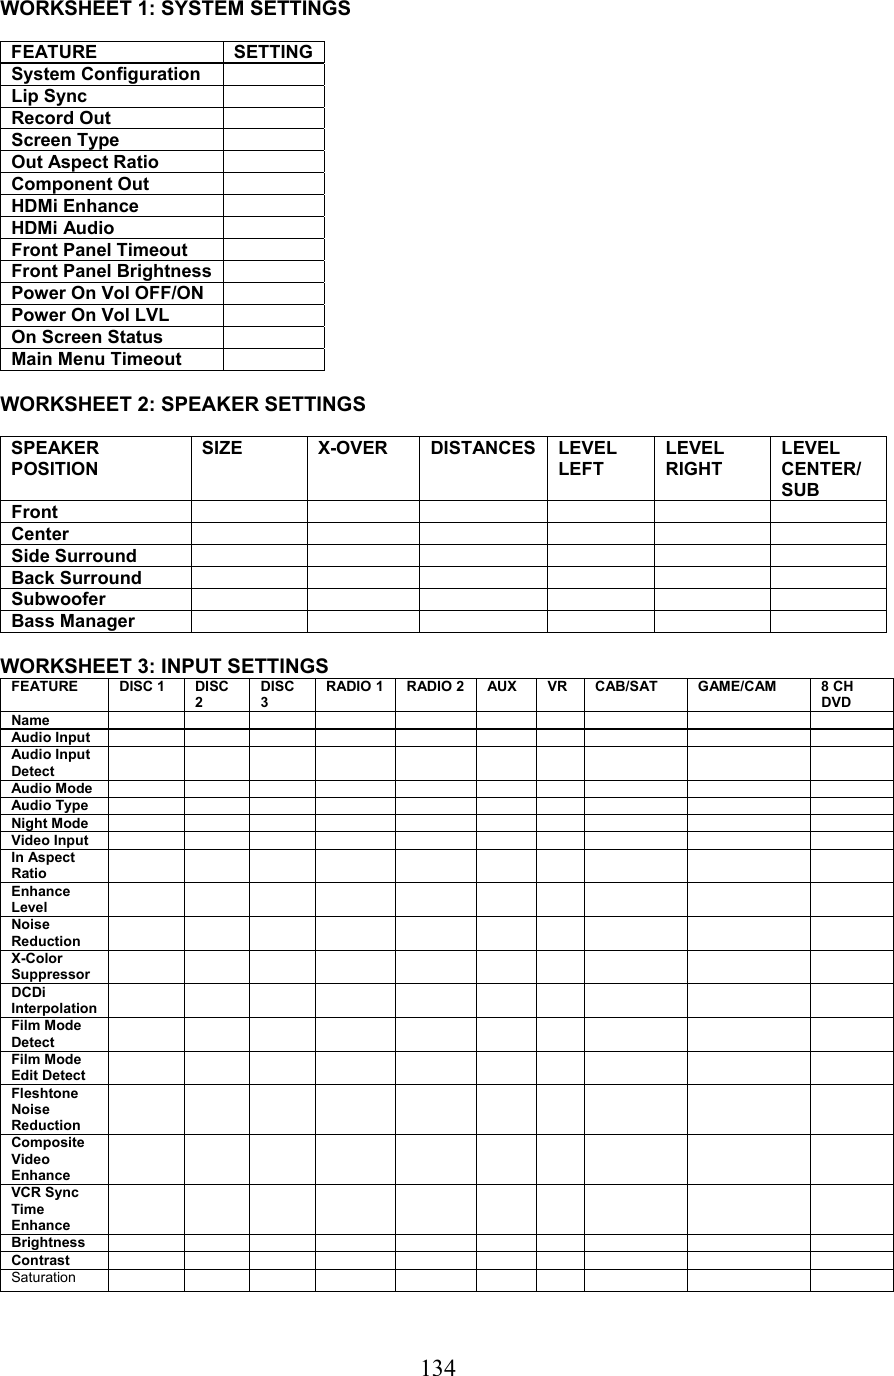  134WORKSHEET 1: SYSTEM SETTINGS  FEATURE SETTING System Configuration   Lip Sync   Record Out   Screen Type   Out Aspect Ratio   Component Out   HDMi Enhance   HDMi Audio   Front Panel Timeout   Front Panel Brightness   Power On Vol OFF/ON   Power On Vol LVL   On Screen Status   Main Menu Timeout    WORKSHEET 2: SPEAKER SETTINGS  SPEAKER POSITION SIZE X-OVER DISTANCES LEVEL LEFT LEVEL RIGHT LEVEL CENTER/ SUB Front       Center       Side Surround             Back Surround             Subwoofer            Bass Manager              WORKSHEET 3: INPUT SETTINGS FEATURE  DISC 1   DISC 2 DISC 3 RADIO 1 RADIO 2 AUX  VR  CAB/SAT  GAME/CAM  8 CH DVD Name                 Audio Input                Audio Input Detect                Audio Mode                Audio Type                Night Mode                Video Input                In Aspect Ratio                Enhance Level                Noise Reduction                X-Color Suppressor                DCDi Interpolation                Film Mode Detect                Film Mode Edit Detect                Fleshtone Noise Reduction                Composite Video Enhance                VCR Sync Time Enhance                Brightness                Contrast                Saturation                